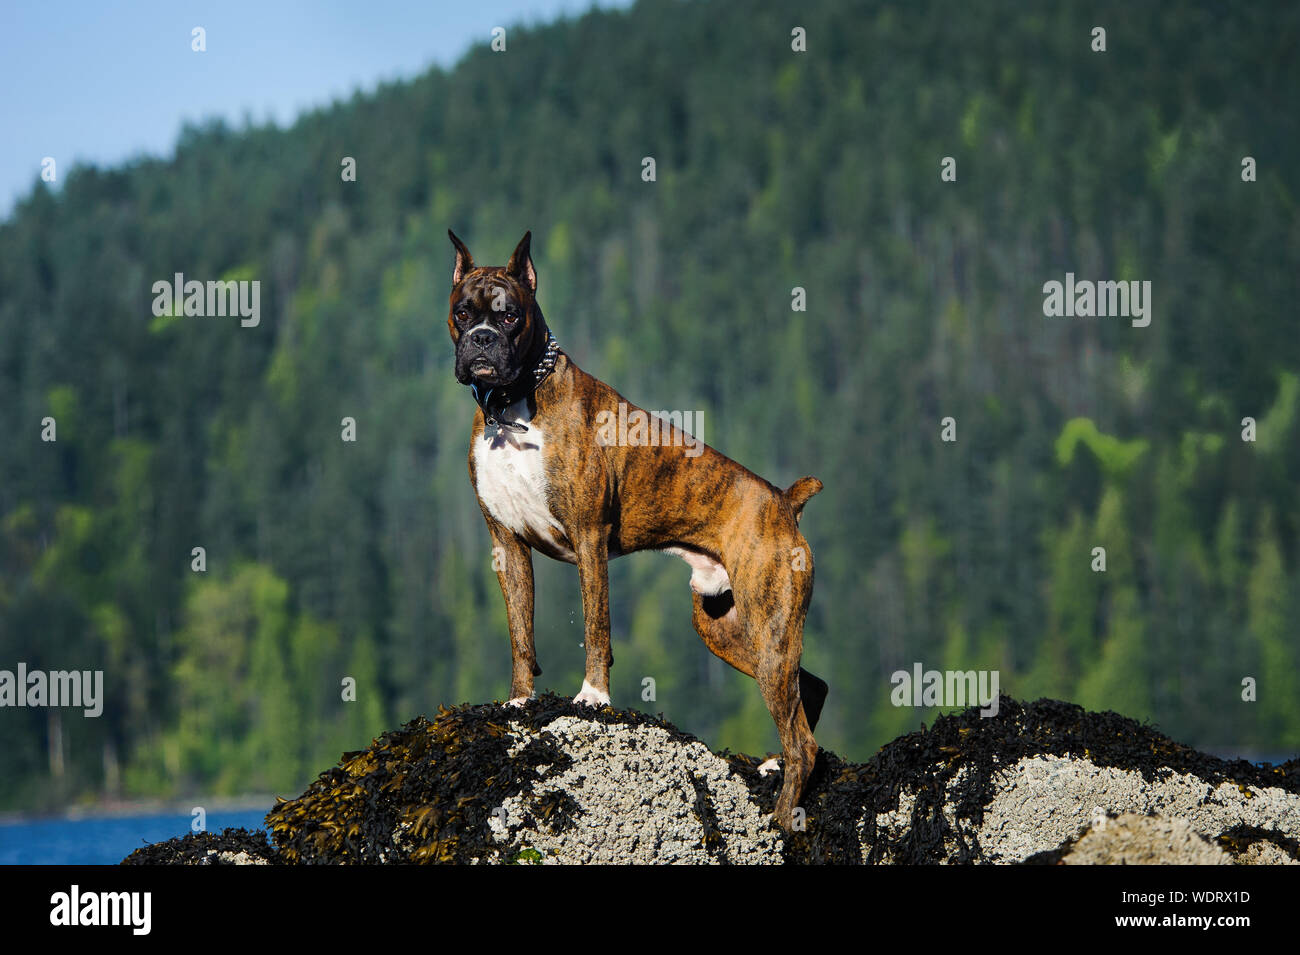 Portrait Of Dog Standing On Rock Against Trees Stock Photo